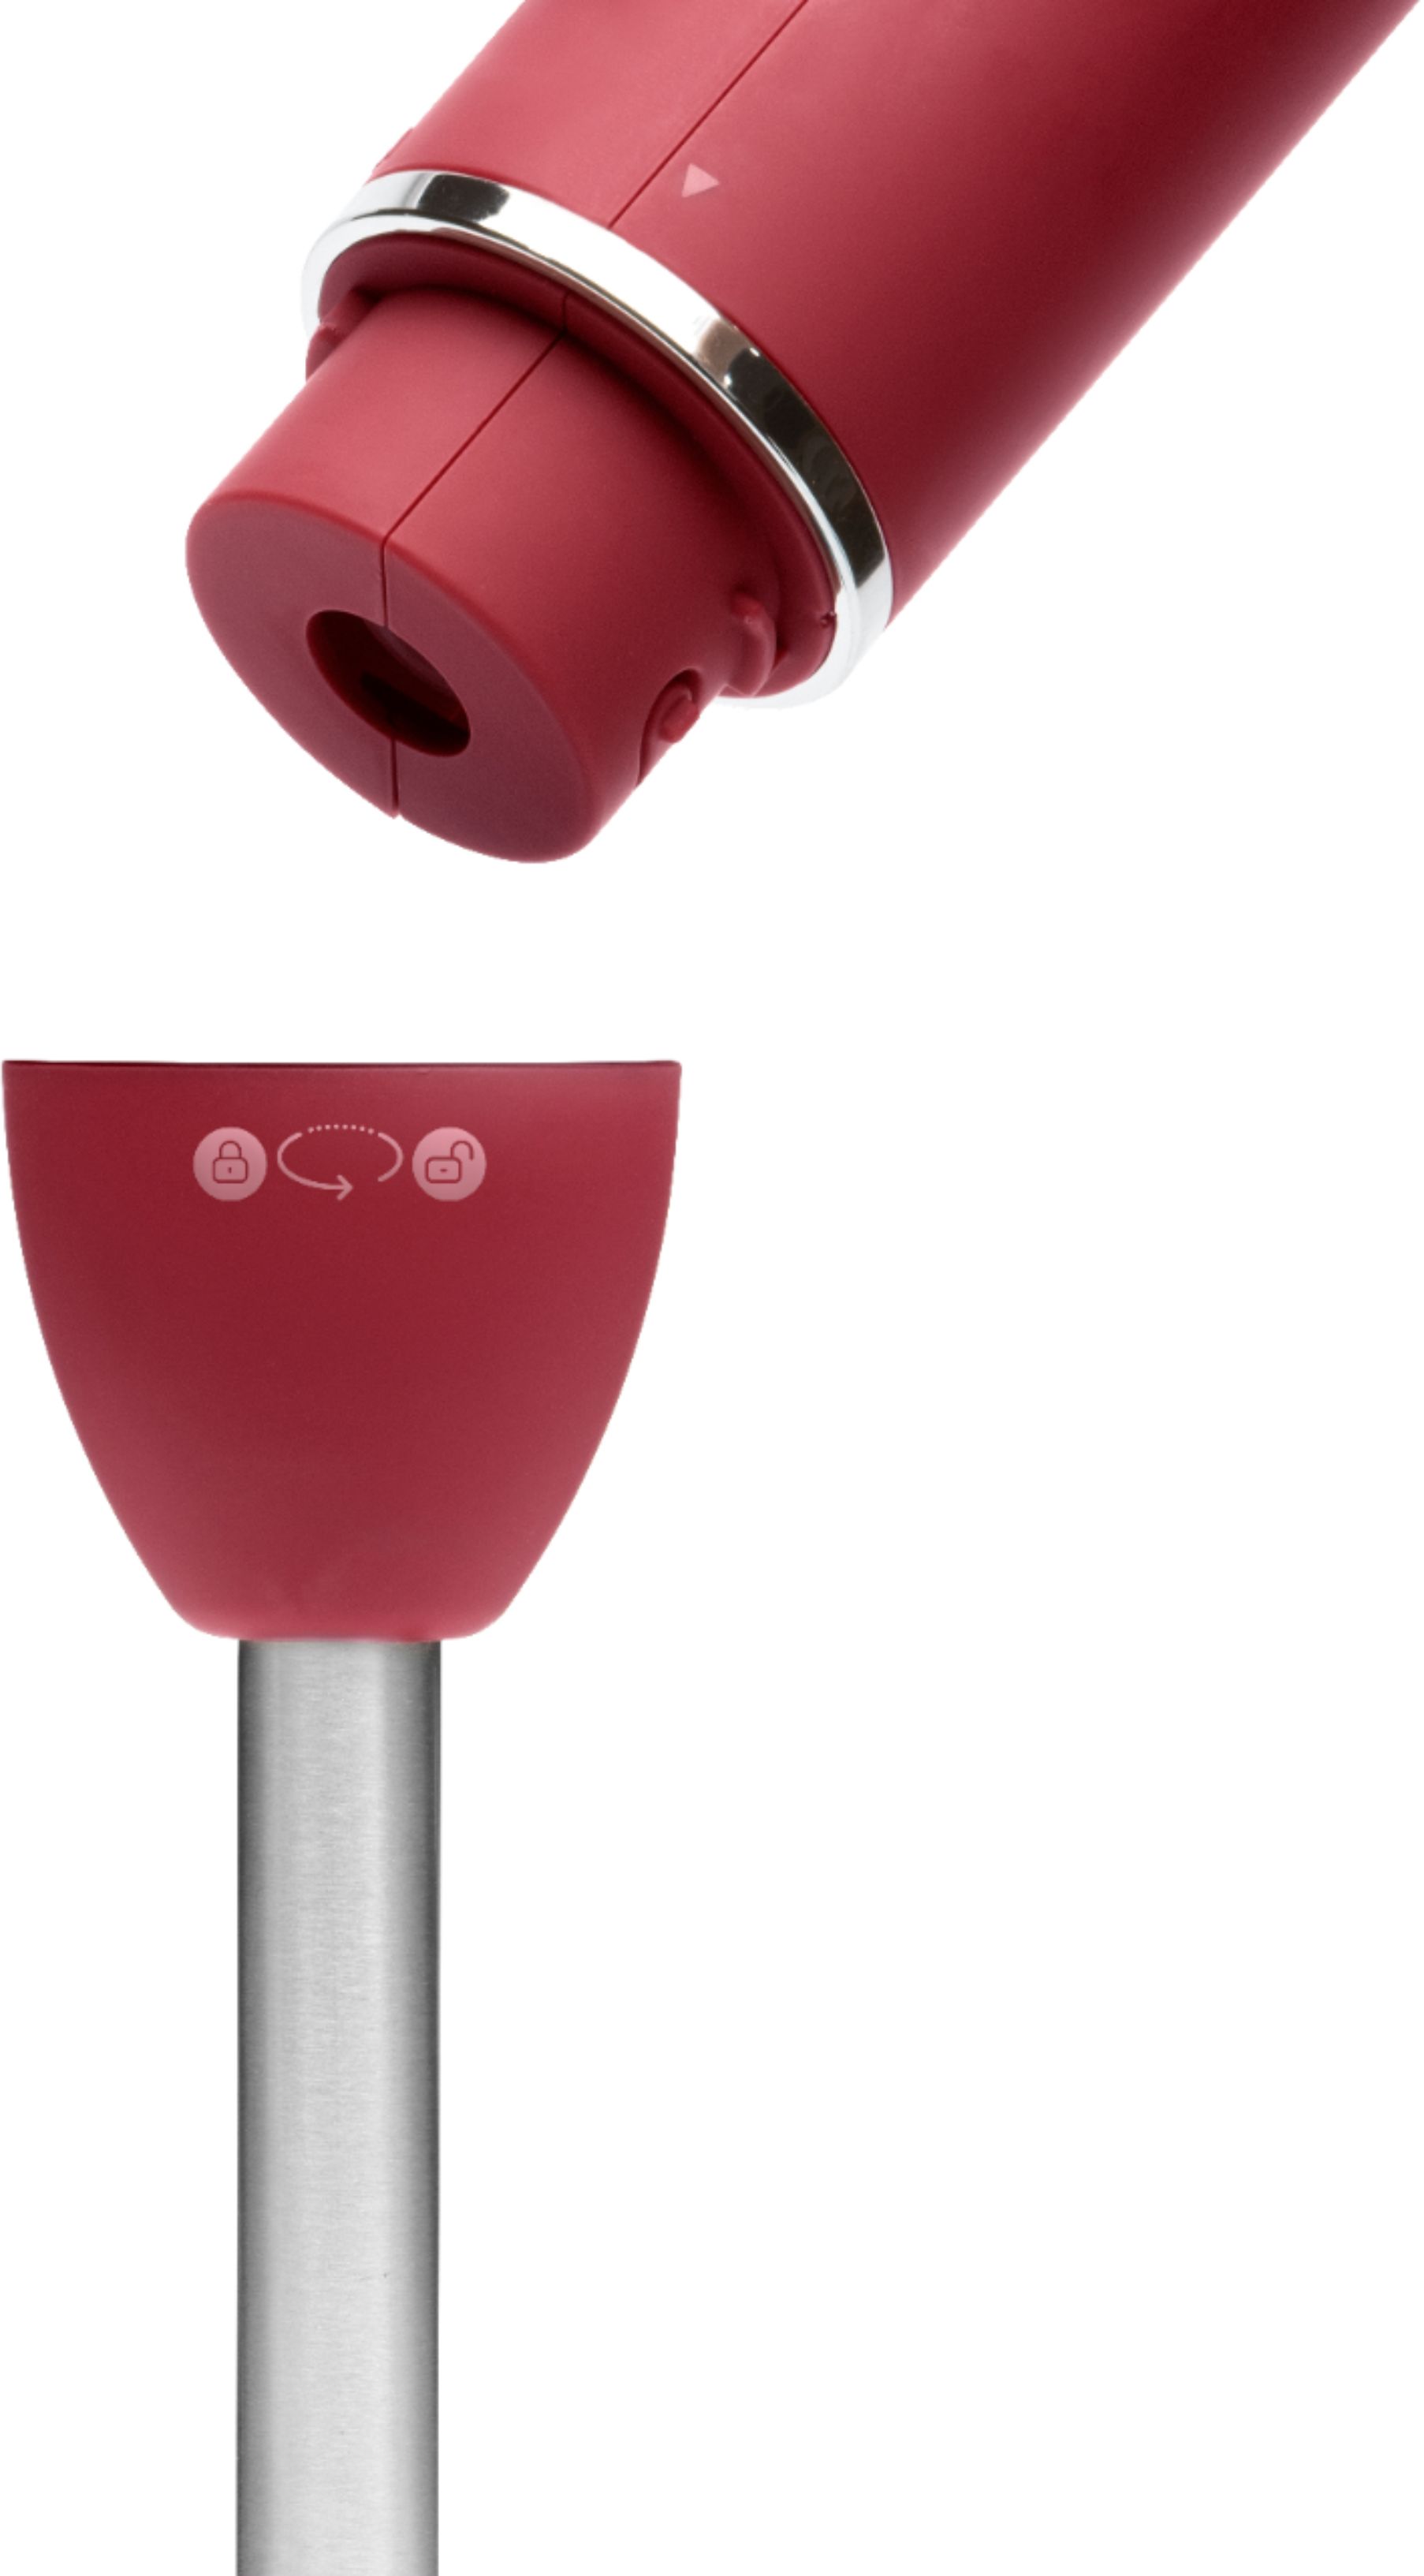 Dropship Hand Blender Immersion Blender Handheld Stick Batidora Electric  Blenders Emersion Hand Mixer For Kitchen 5 Core HB 1510 RED to Sell Online  at a Lower Price